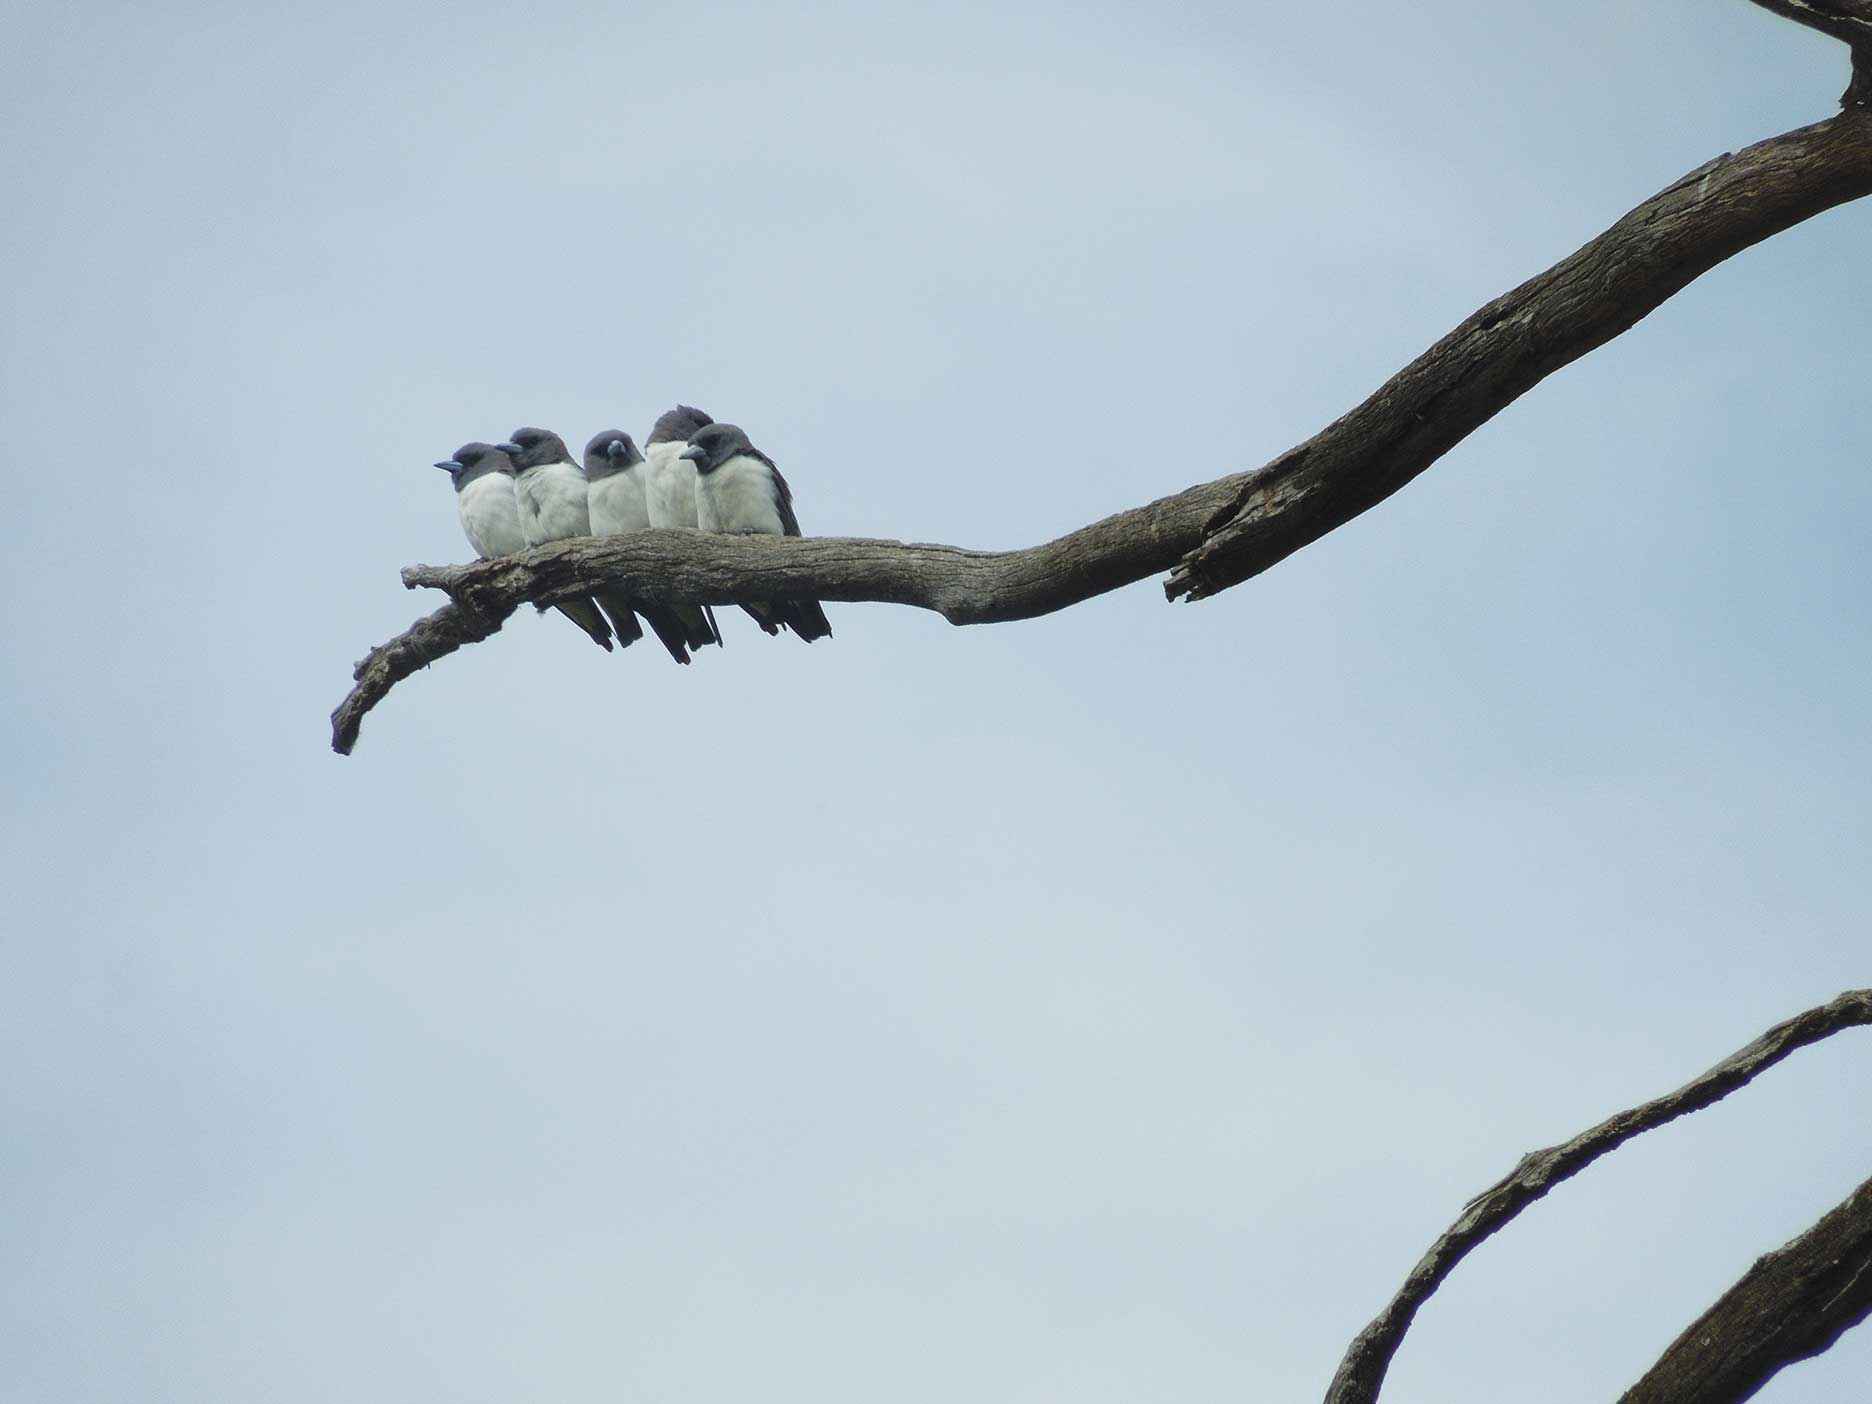 Kyabram Urban Landcare Group held a recent event on enhancing native birds in the environment. Birds like these white-breasted woodswallows that have been observed returning to the restored Landcare sites at Ern Miles Reserve were the focus of the event.<br />
